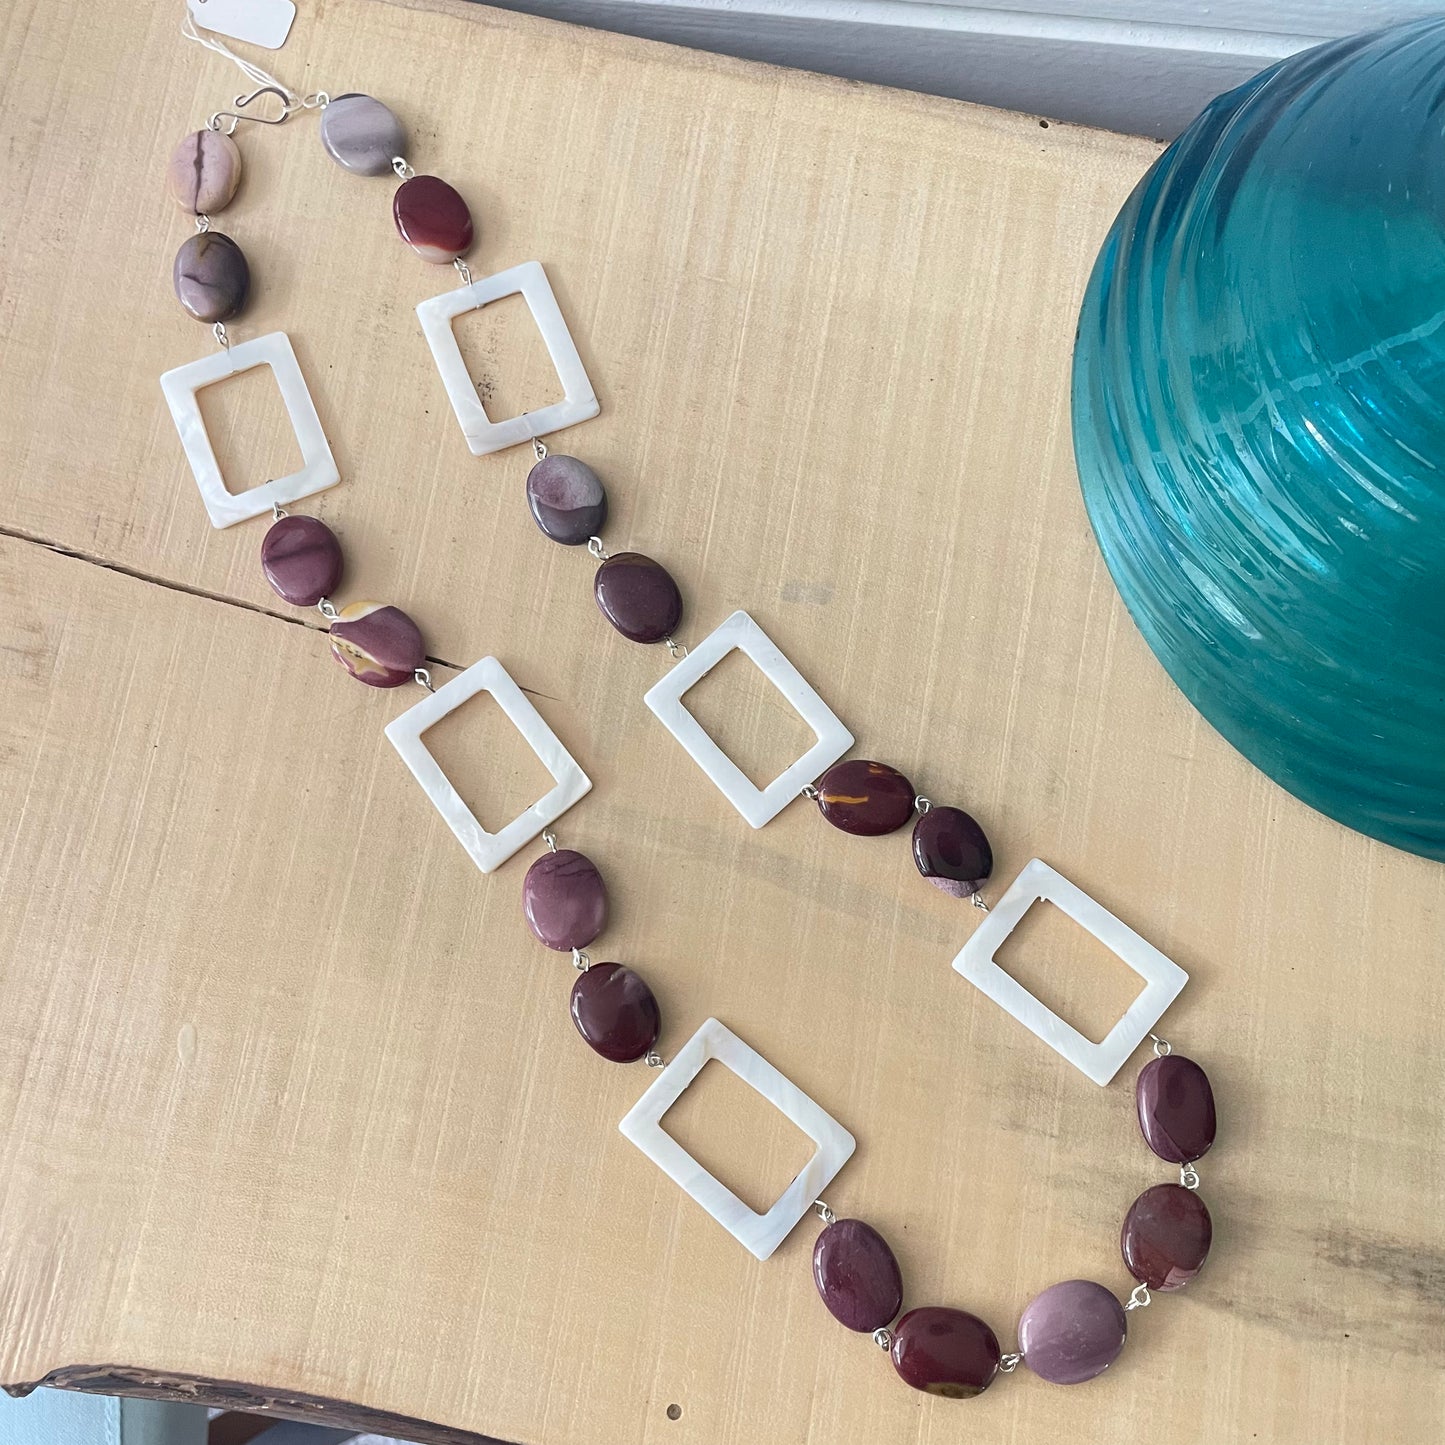 Marbled Moukaite Jasper & Iridescent Shell Necklace 29" Geometric Multicolor Mauve Cream Ivory Hand Crafted